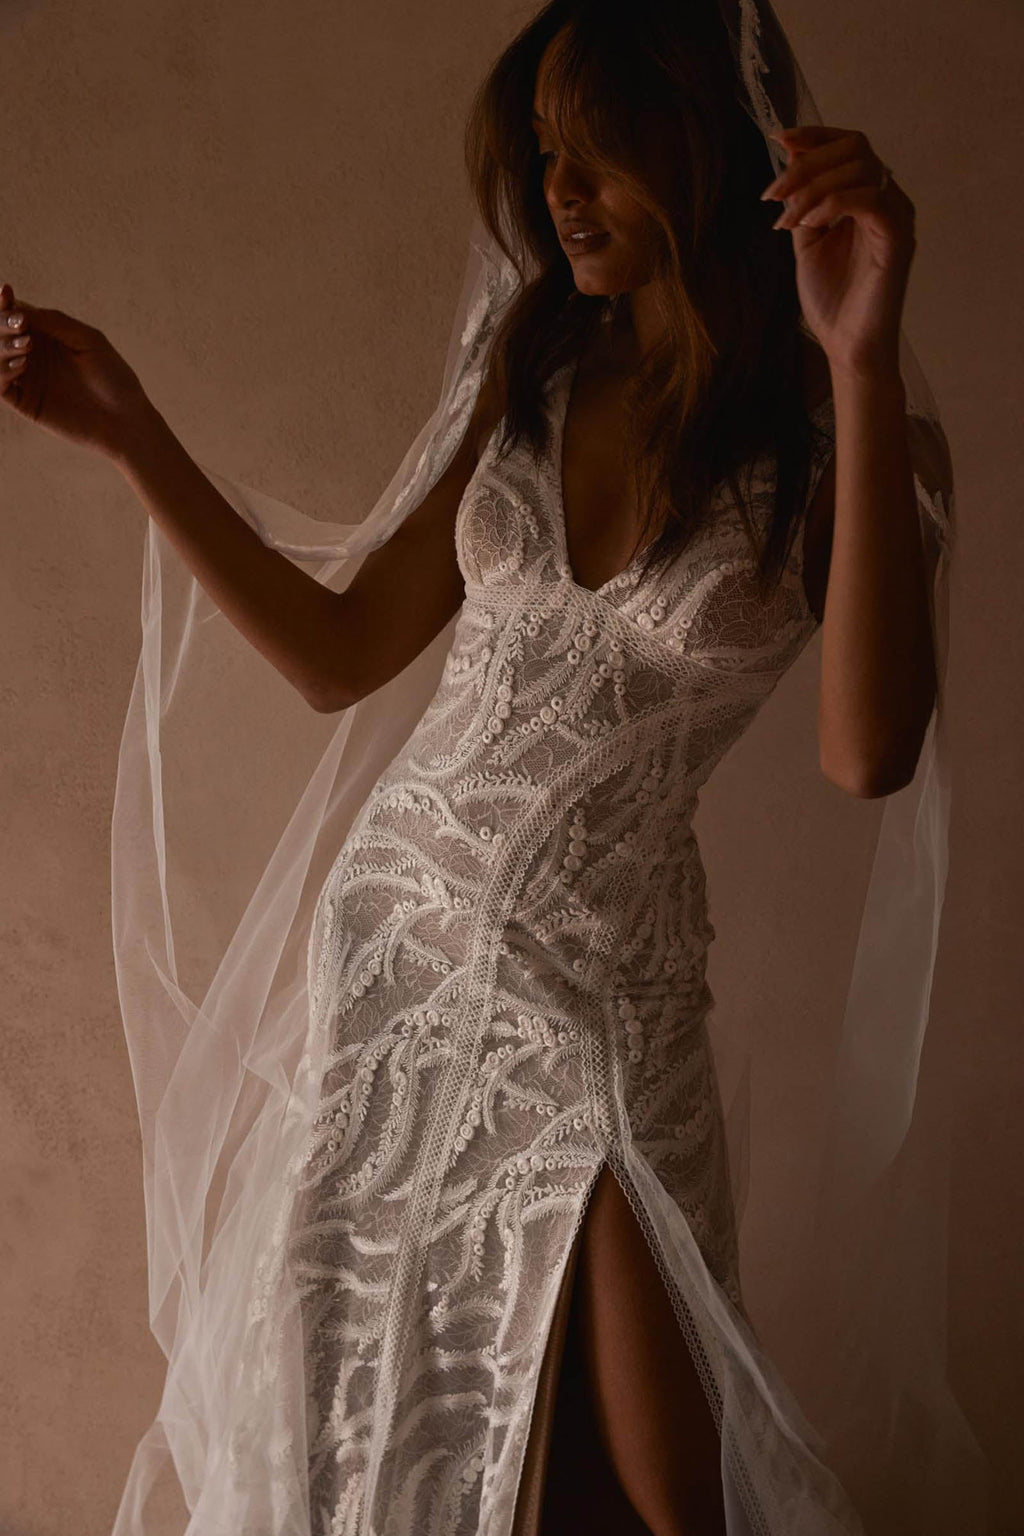 Model dancing in Solstice gown and veil